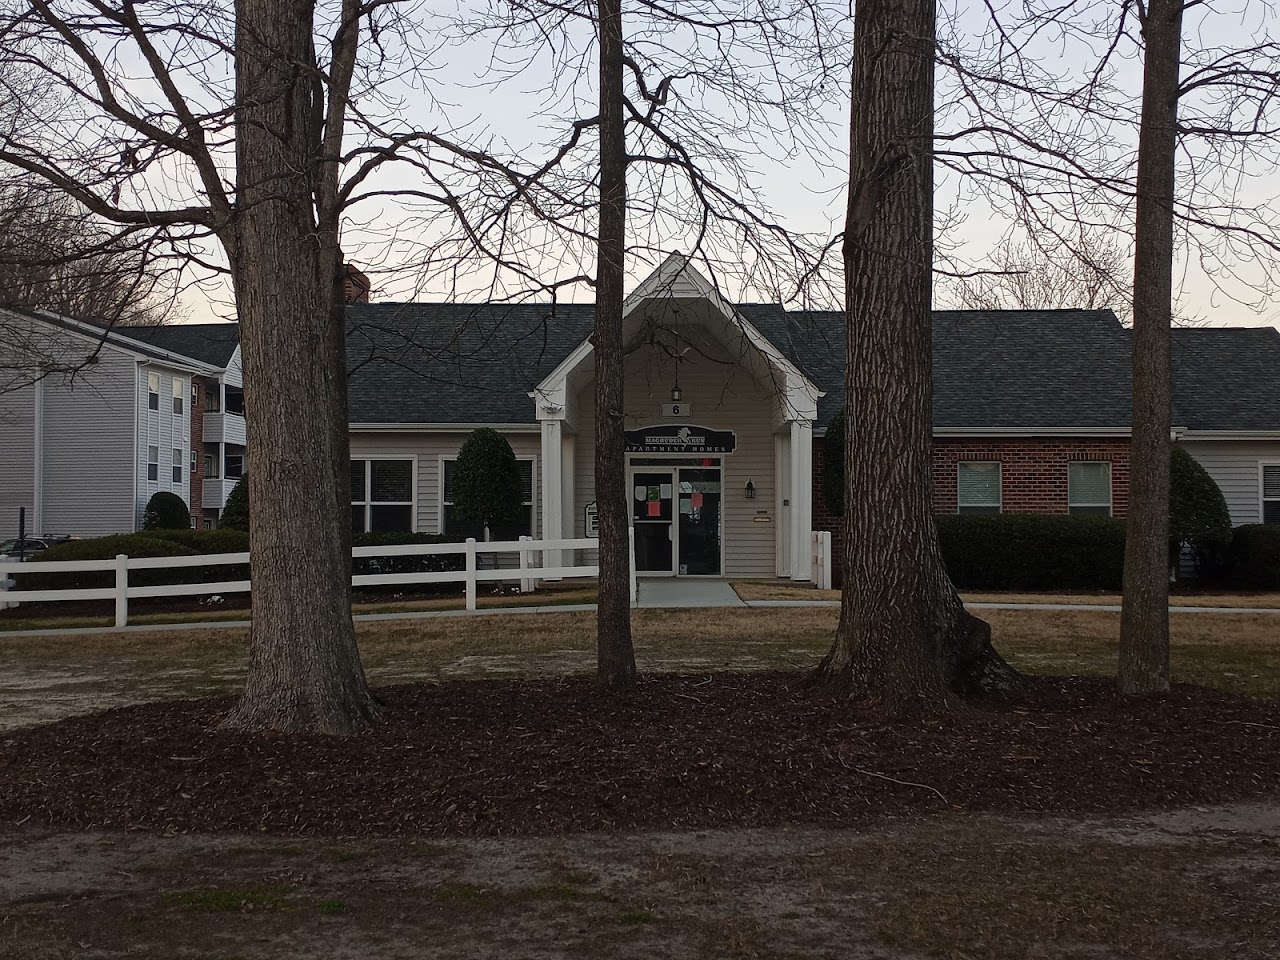 Photo of DERBY RUN II. Affordable housing located at 6 DERBY DR HAMPTON, VA 23666